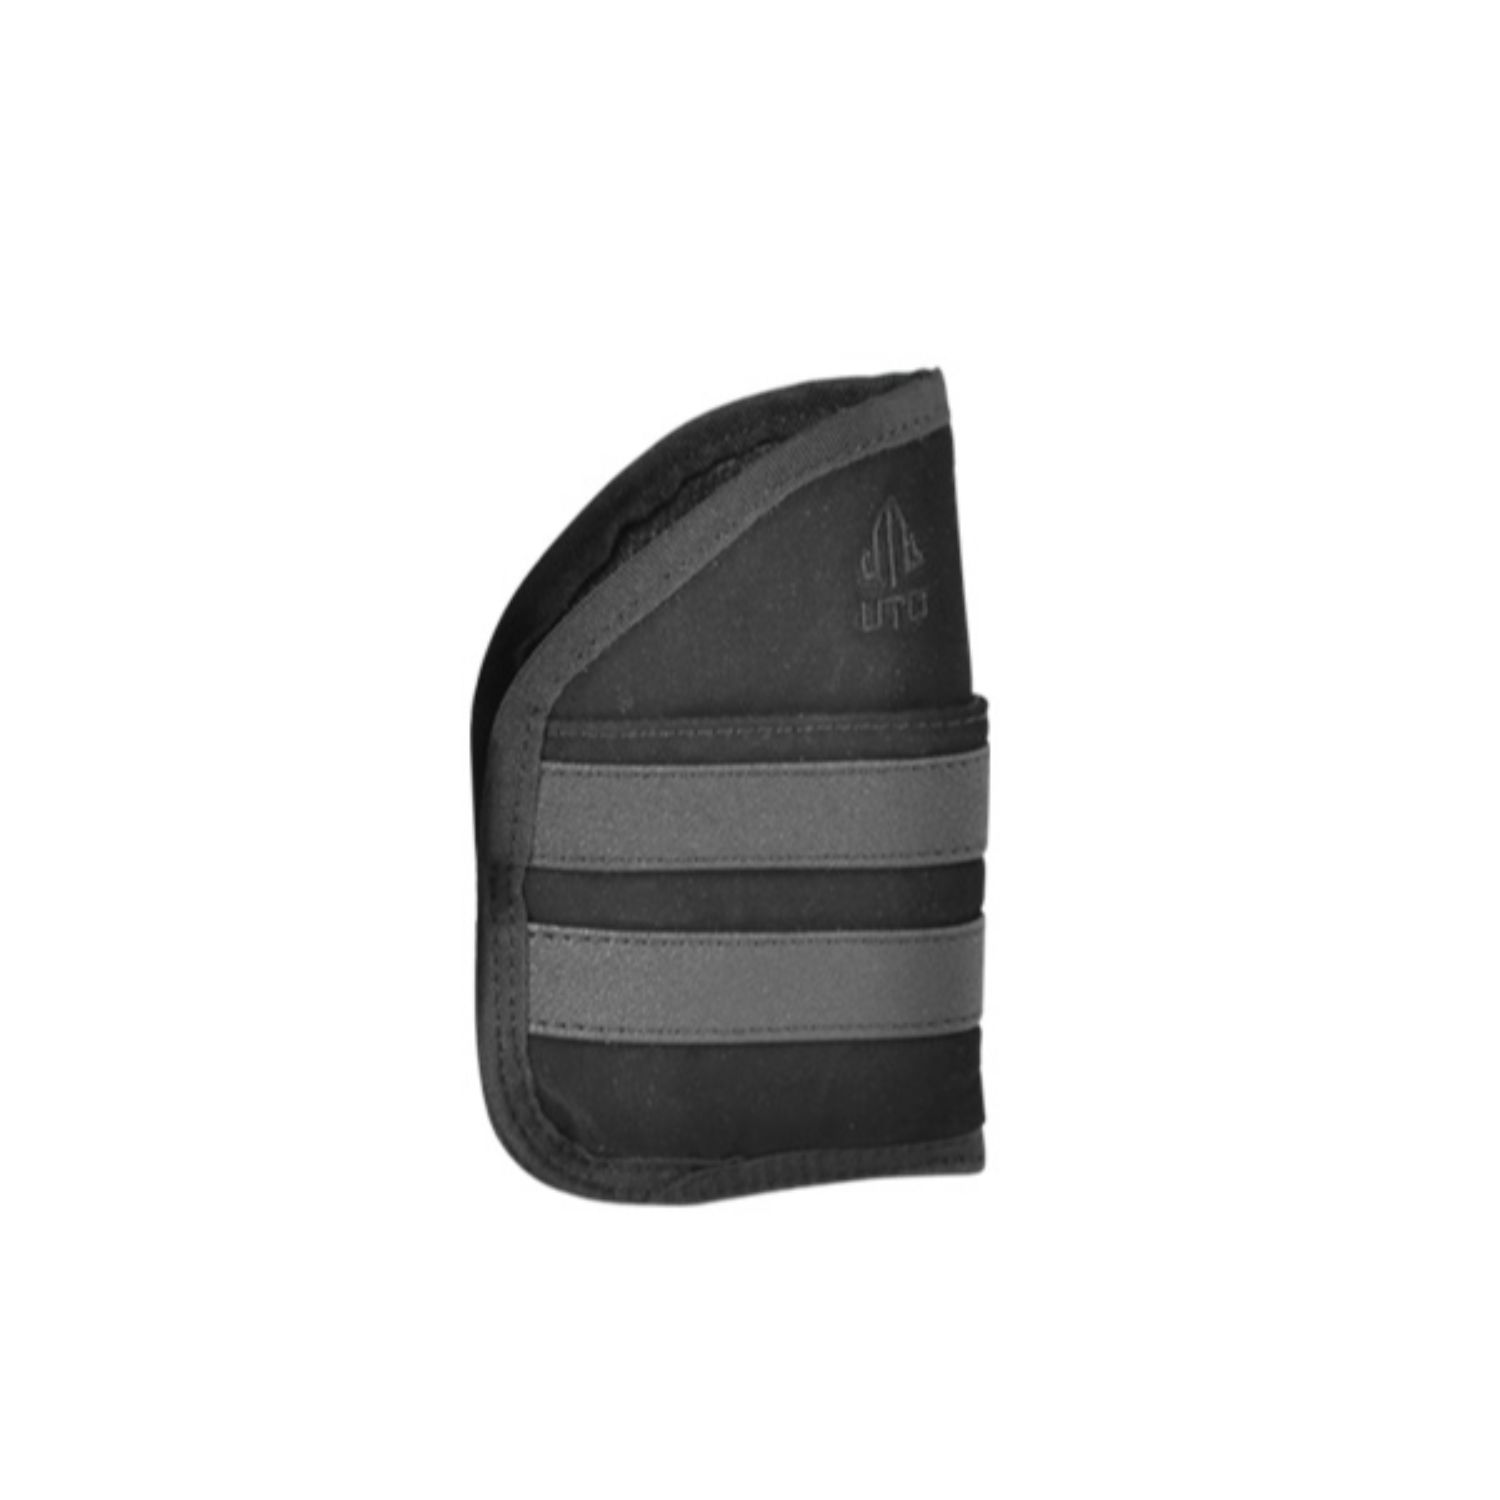 Leapers UTG 3.9in Ambidextrous Pocket Holster-Black